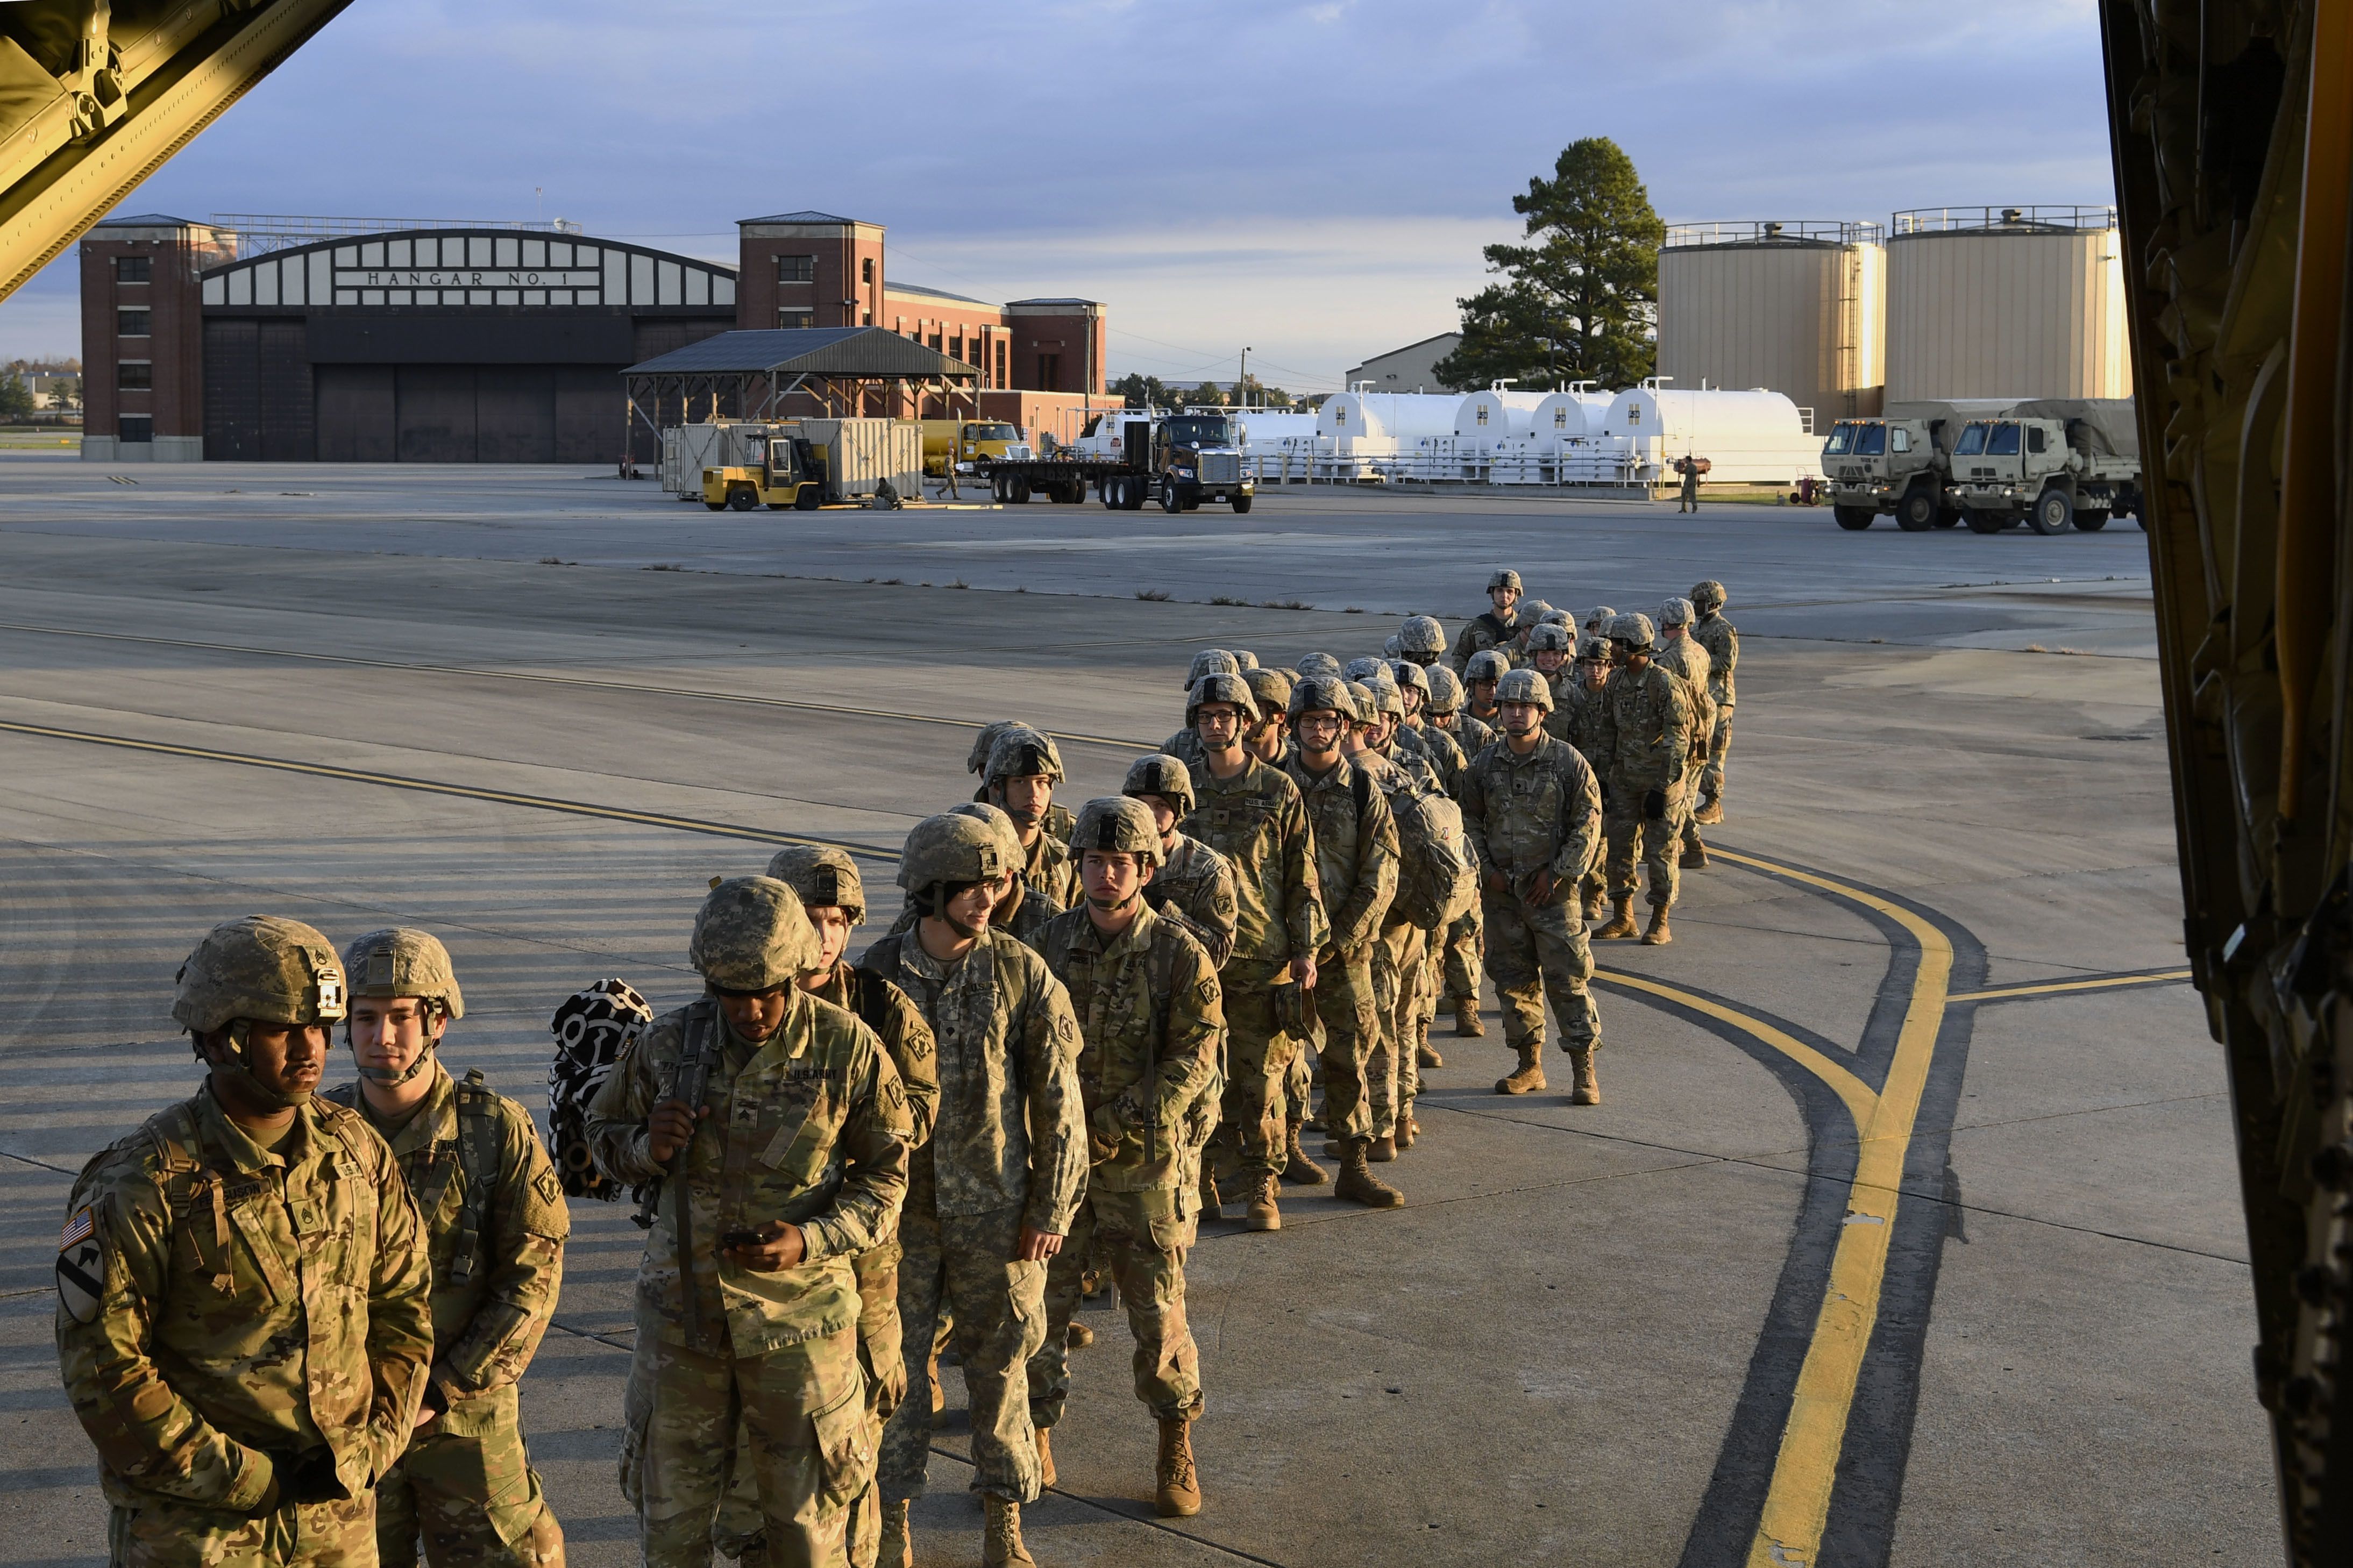 How long will active-duty troops be deployed to the US-Mexico border?